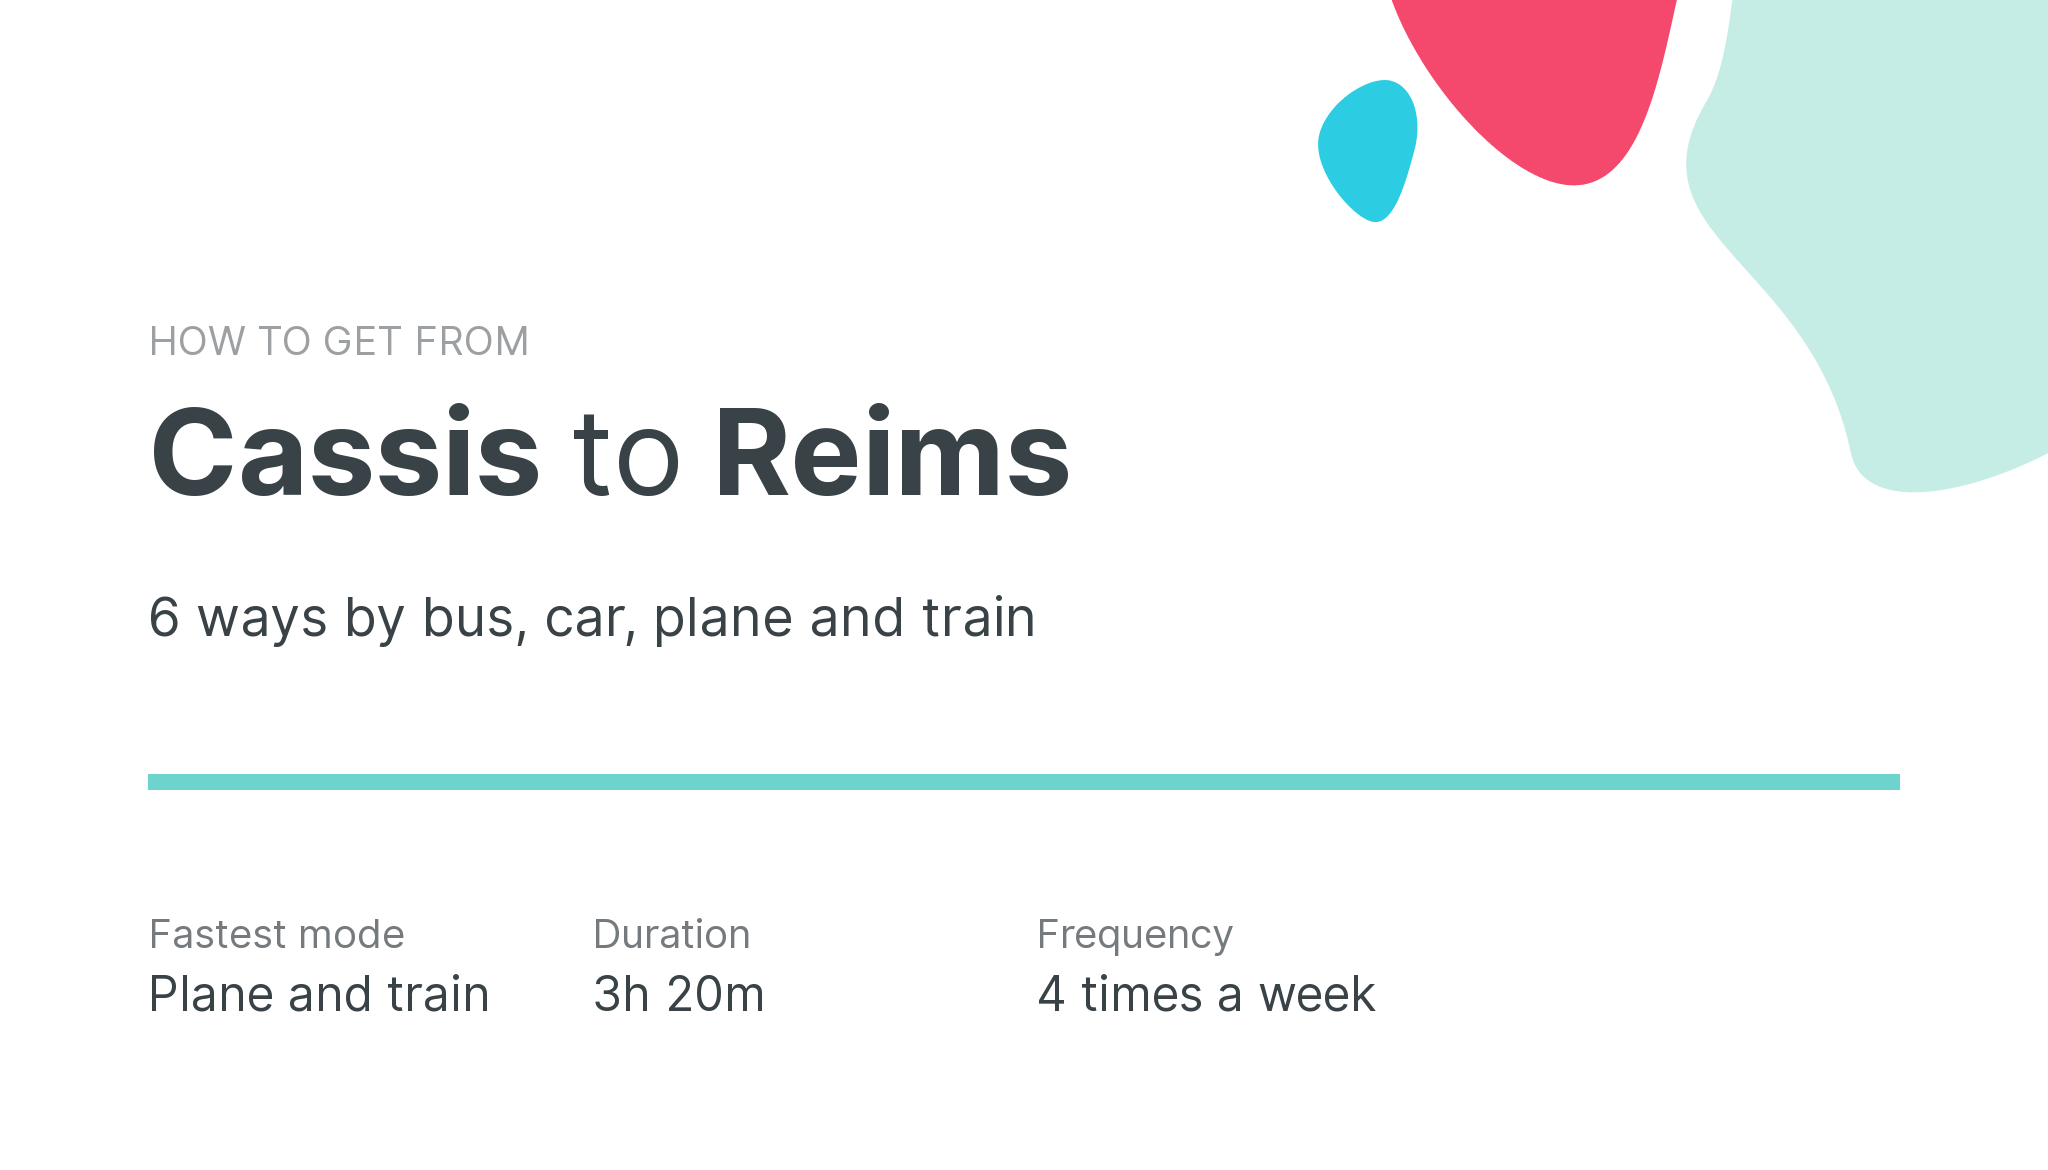 How do I get from Cassis to Reims